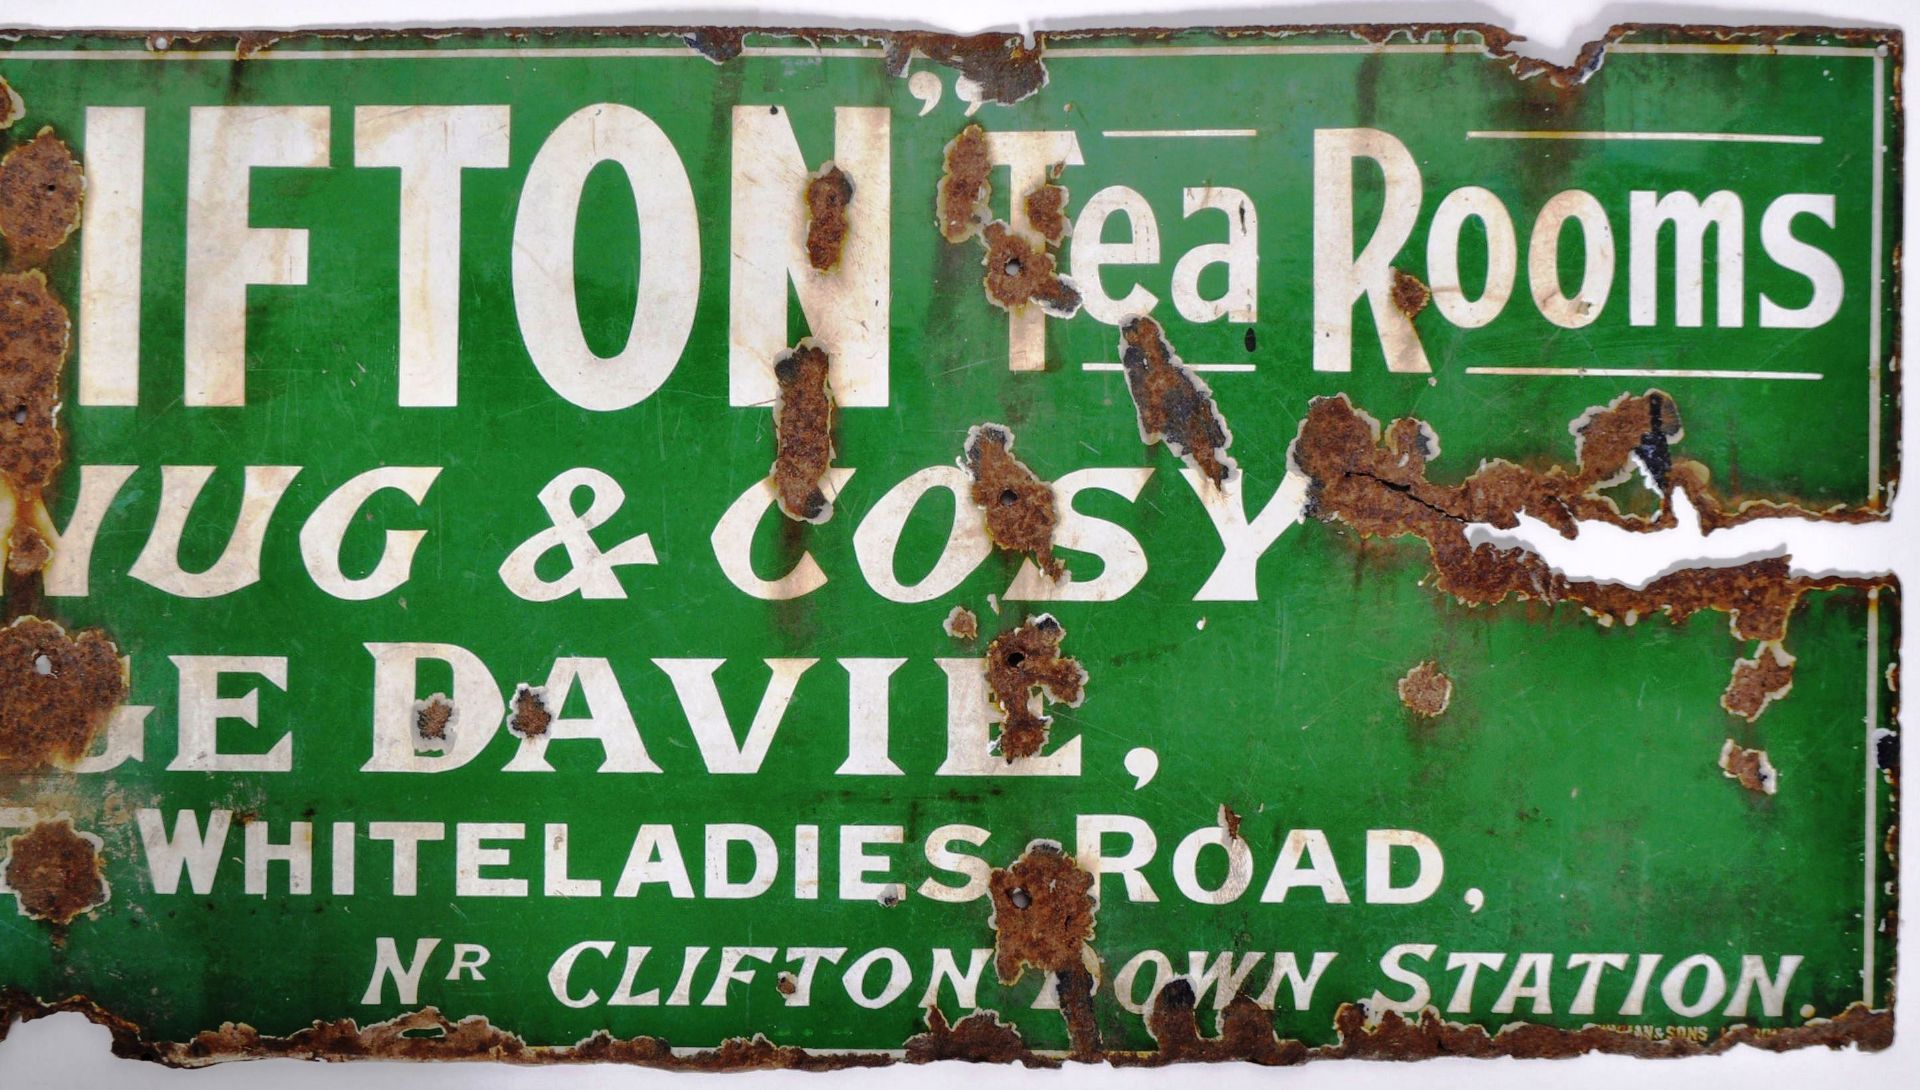 ENAMEL ADVERTISING SIGN - "THE CLIFTON TEA ROOMS" - Image 3 of 4